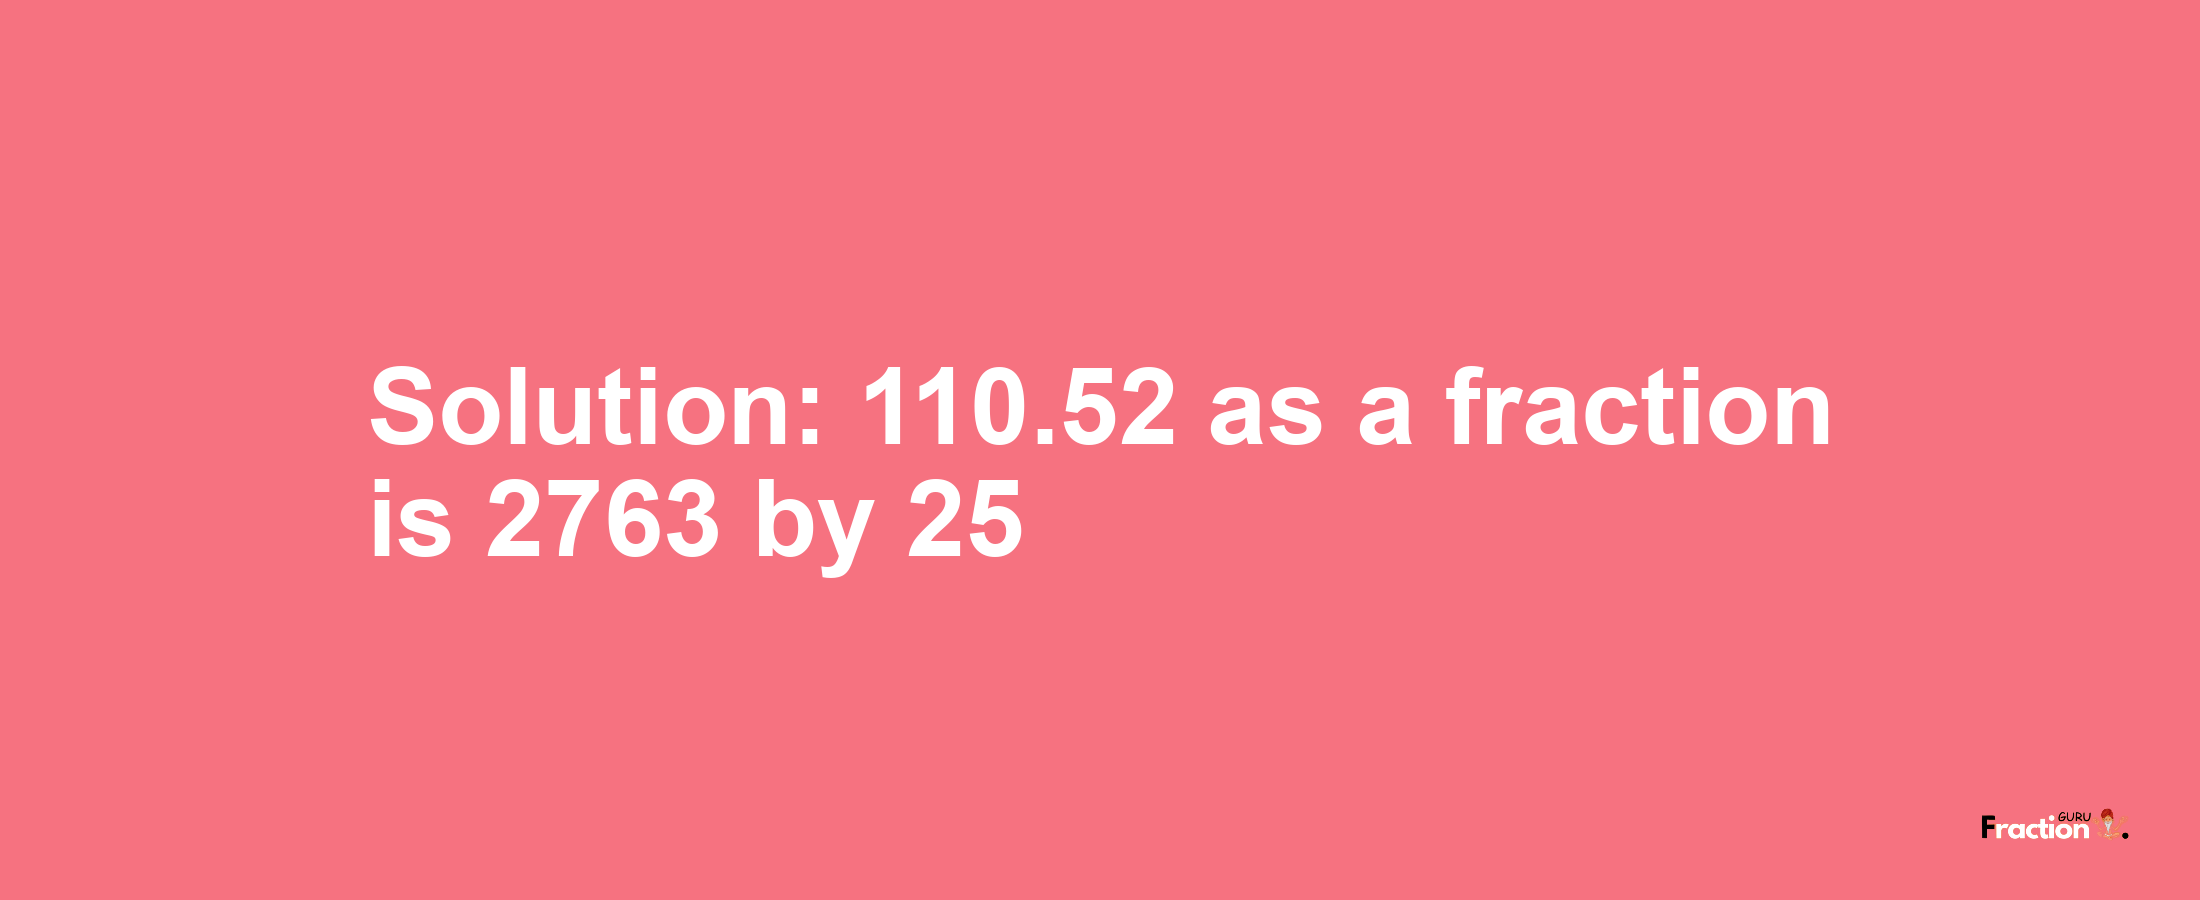 Solution:110.52 as a fraction is 2763/25